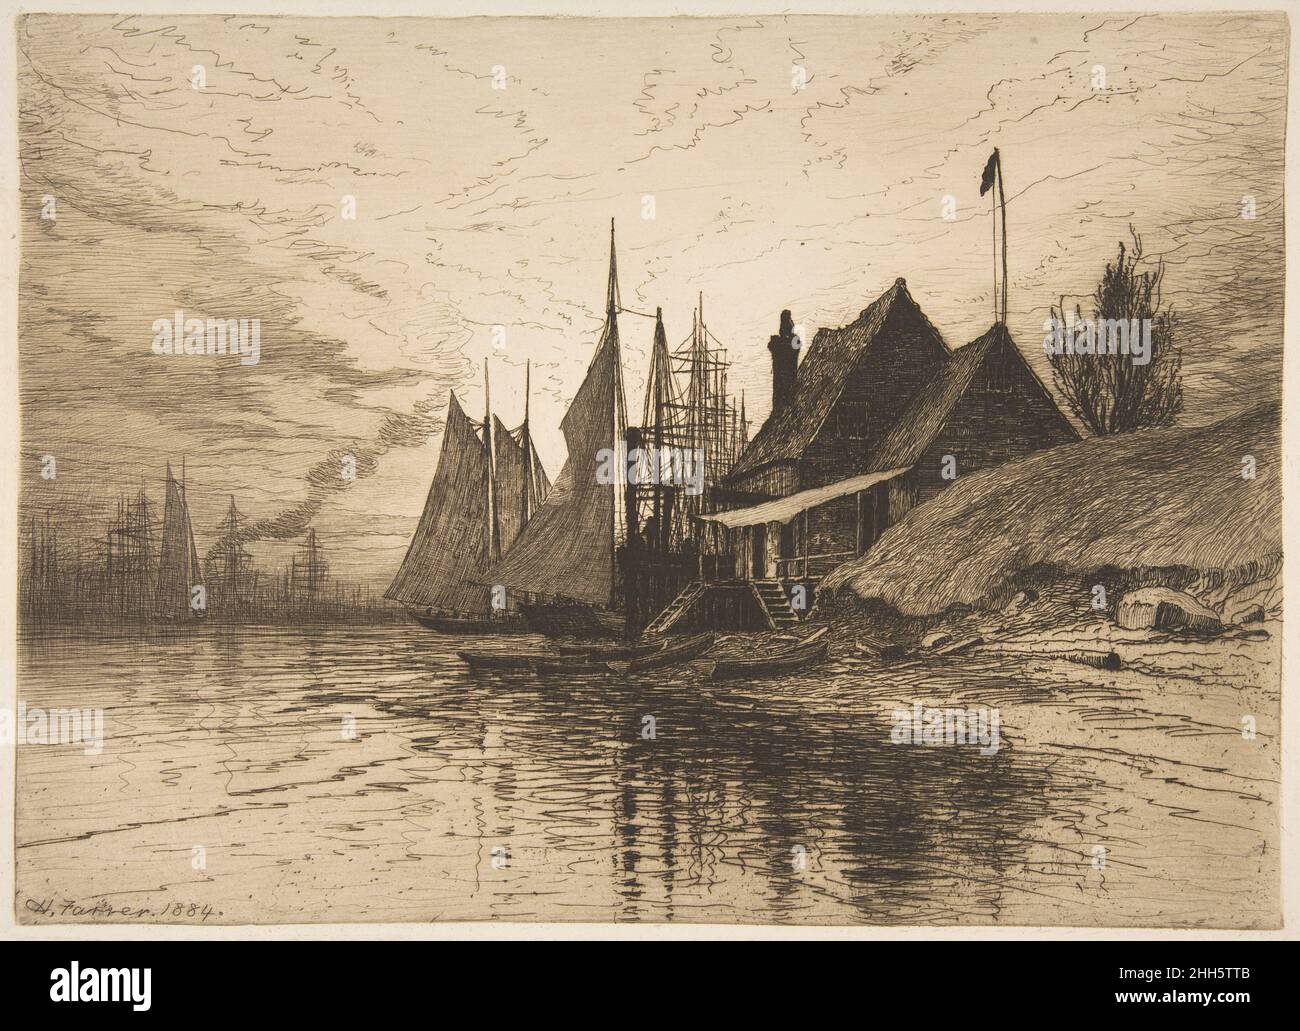 Soir, New York Harbour 1884 Henry Farrer American.Evening, New York Harbour 381008 artiste : Henry Farrer, cuisine américaine, Londres 1844?1903 New York, Evening, New York Harbour, 1884, Etching,Plaque: 9 3/4 ?13 7/16 po(24,7 ?34,2 cm) feuille : 14 1/16 x 18 1/8 po.(35,7 x 46,1 cm).Metropolitan Museum of Art, New York.The Edward W. C. Arnold Collection of New York Prints, Maps and Pictures, Bequest of Edward W. C. Arnold, 1954 (54.90.946) Banque D'Images